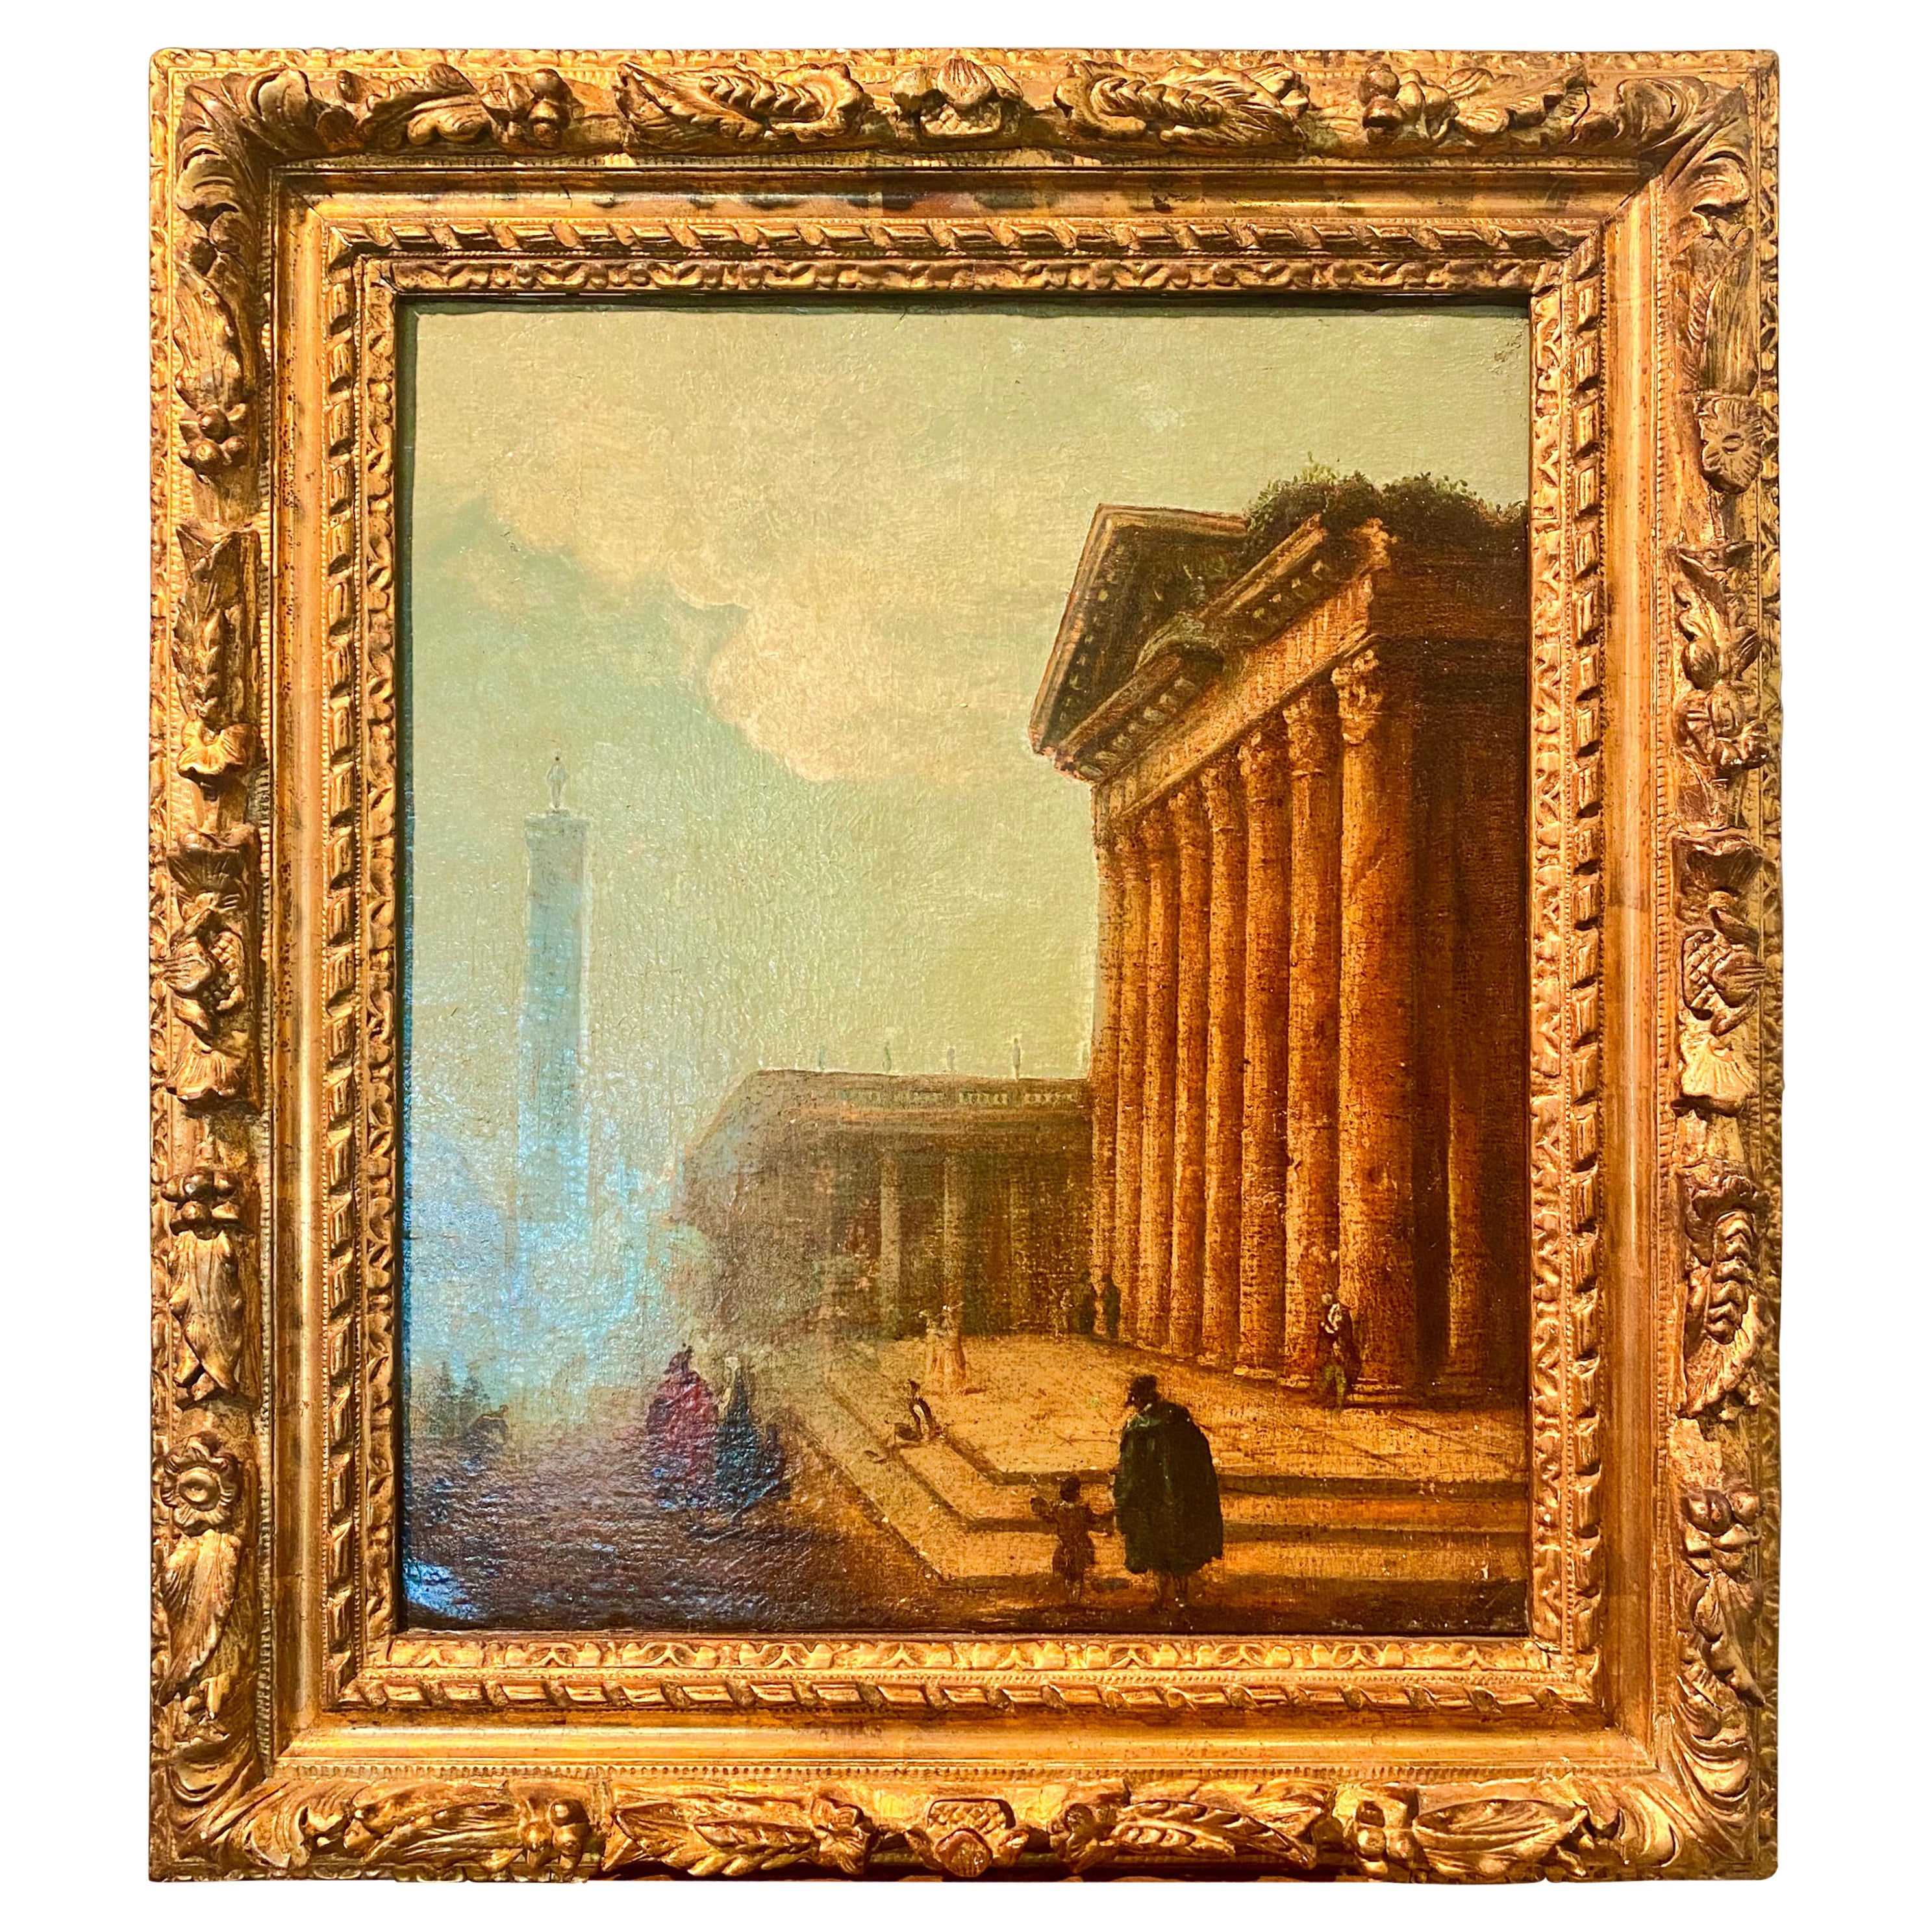 French Neoclassical Architectural Landscape, Oil on Canvas